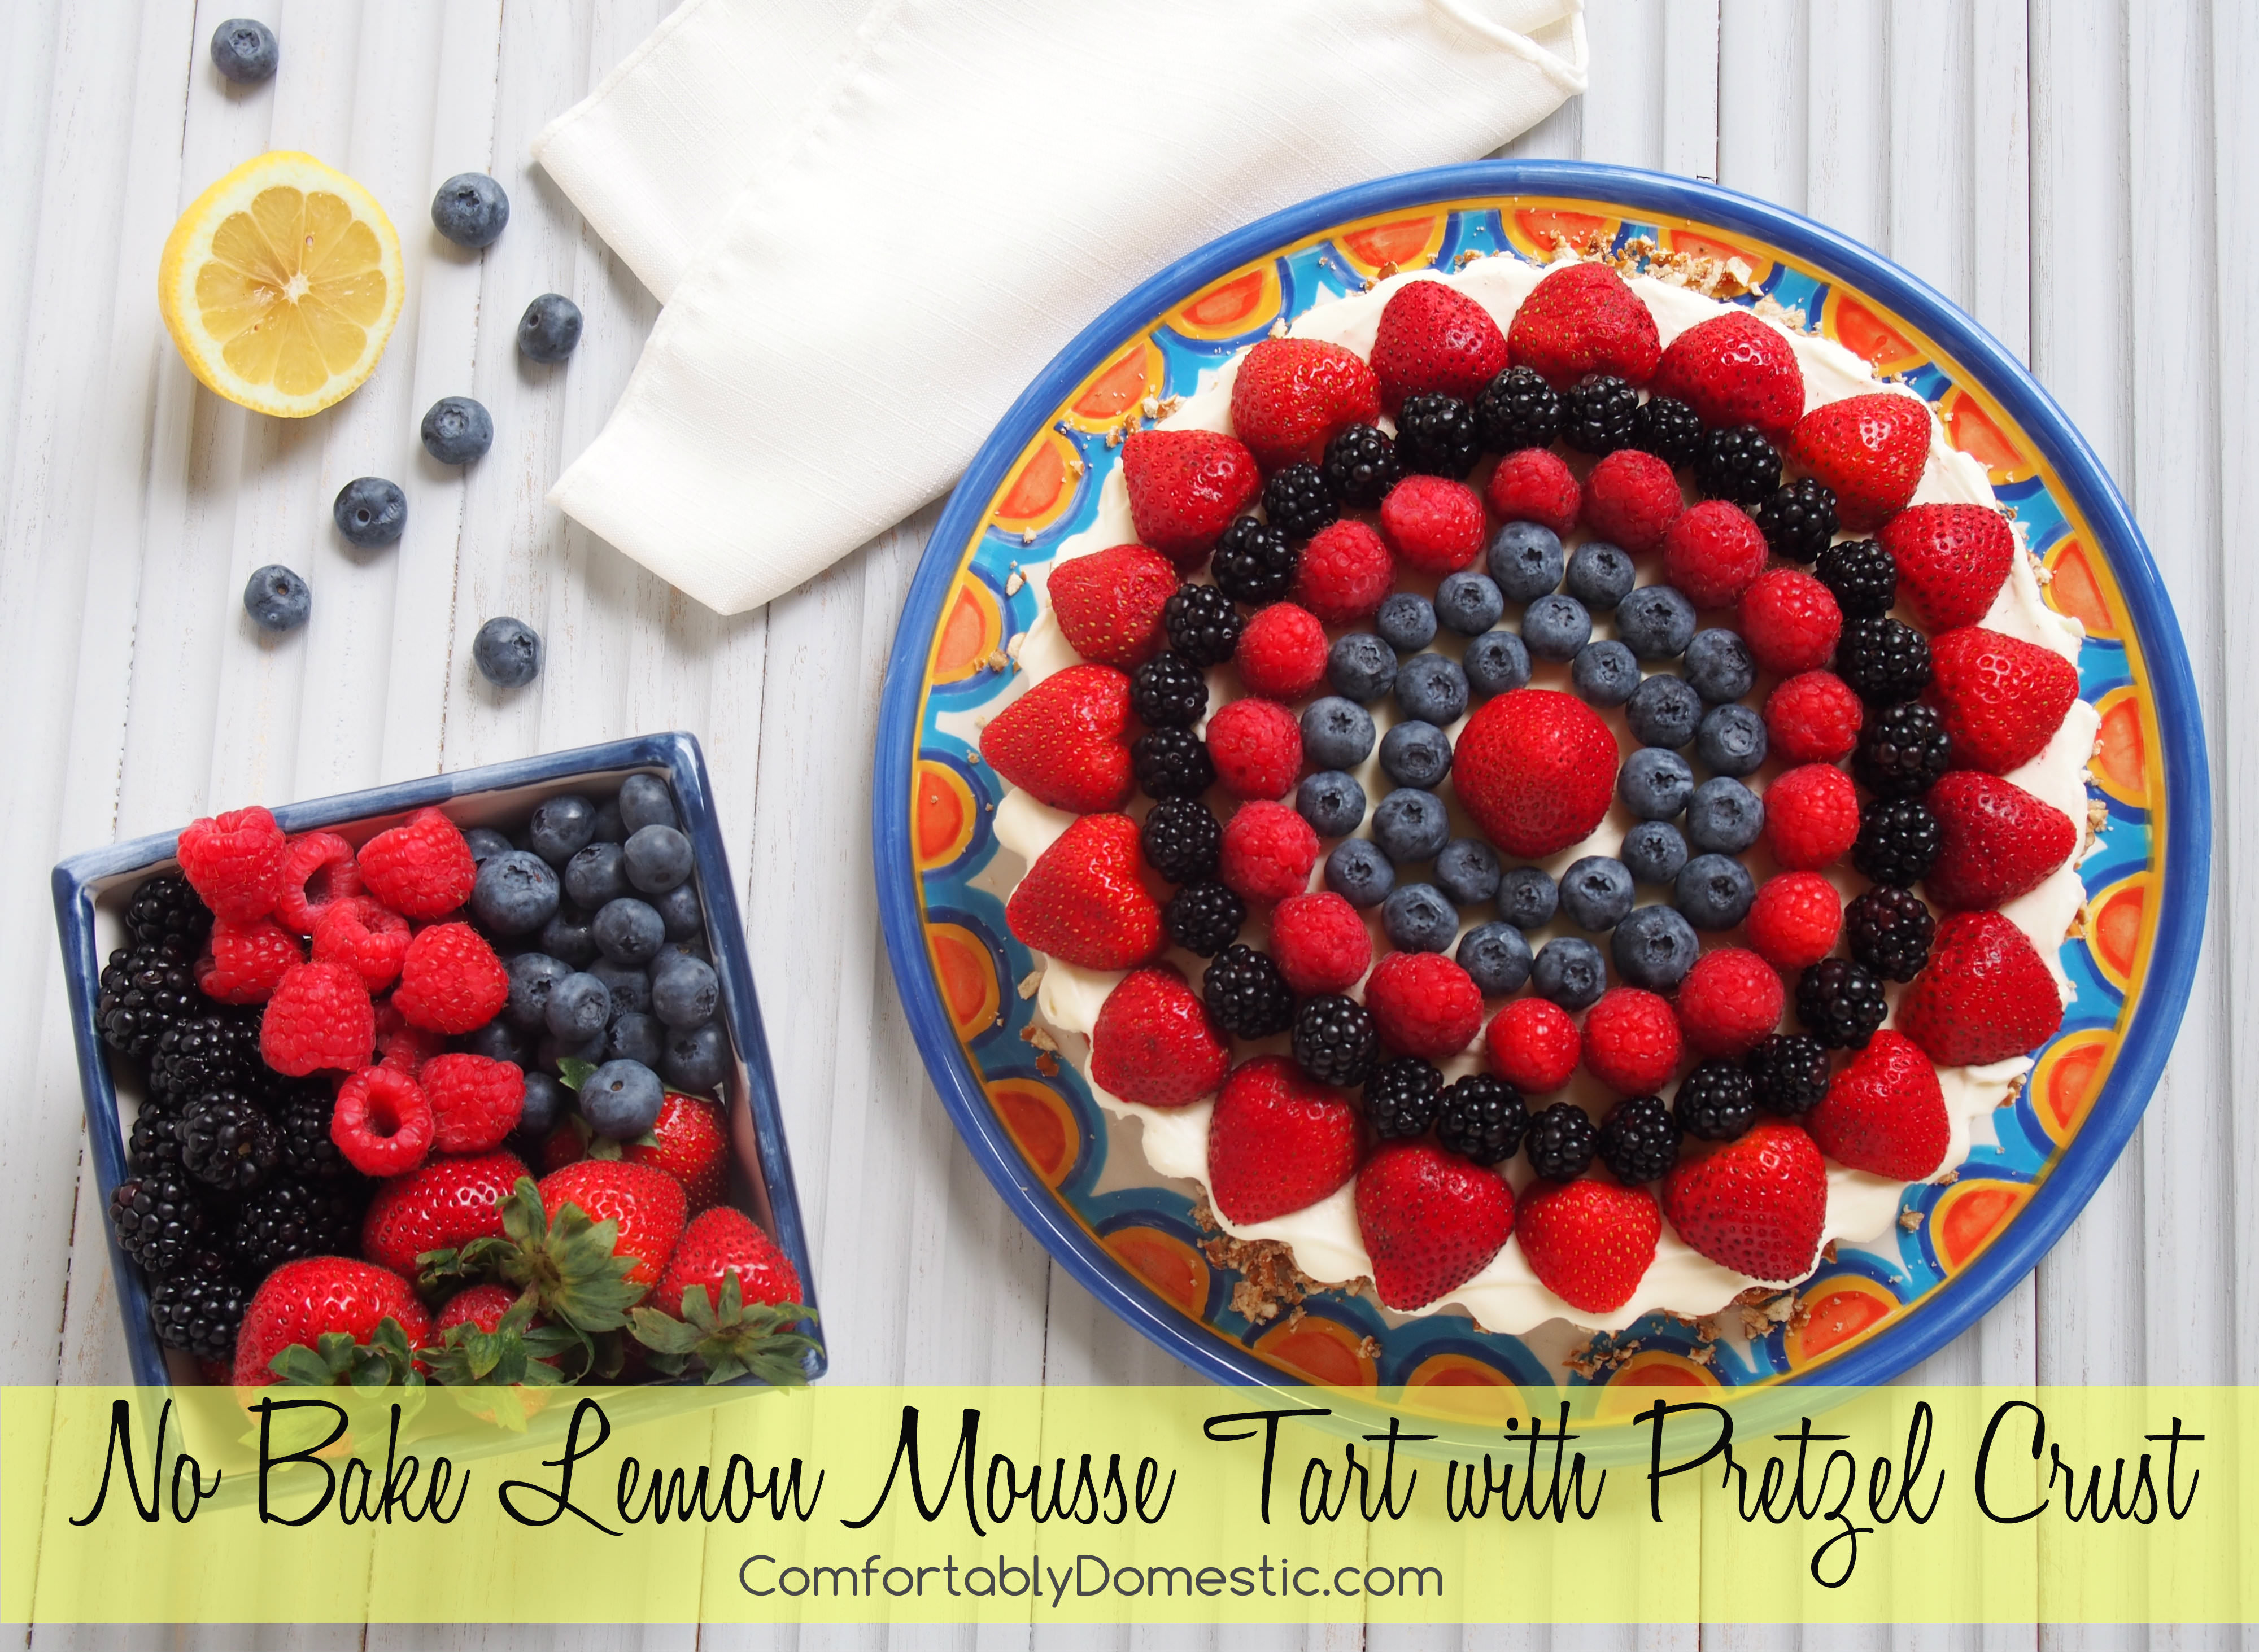 No bake lemon mousse tart is a delightfully bright dessert! Lemon mousse filling nestled in a pretzel crust, topped with fresh berries. The perfect balance of sweet, salty, creamy, and crunchy. | ComfortablyDomestic.com